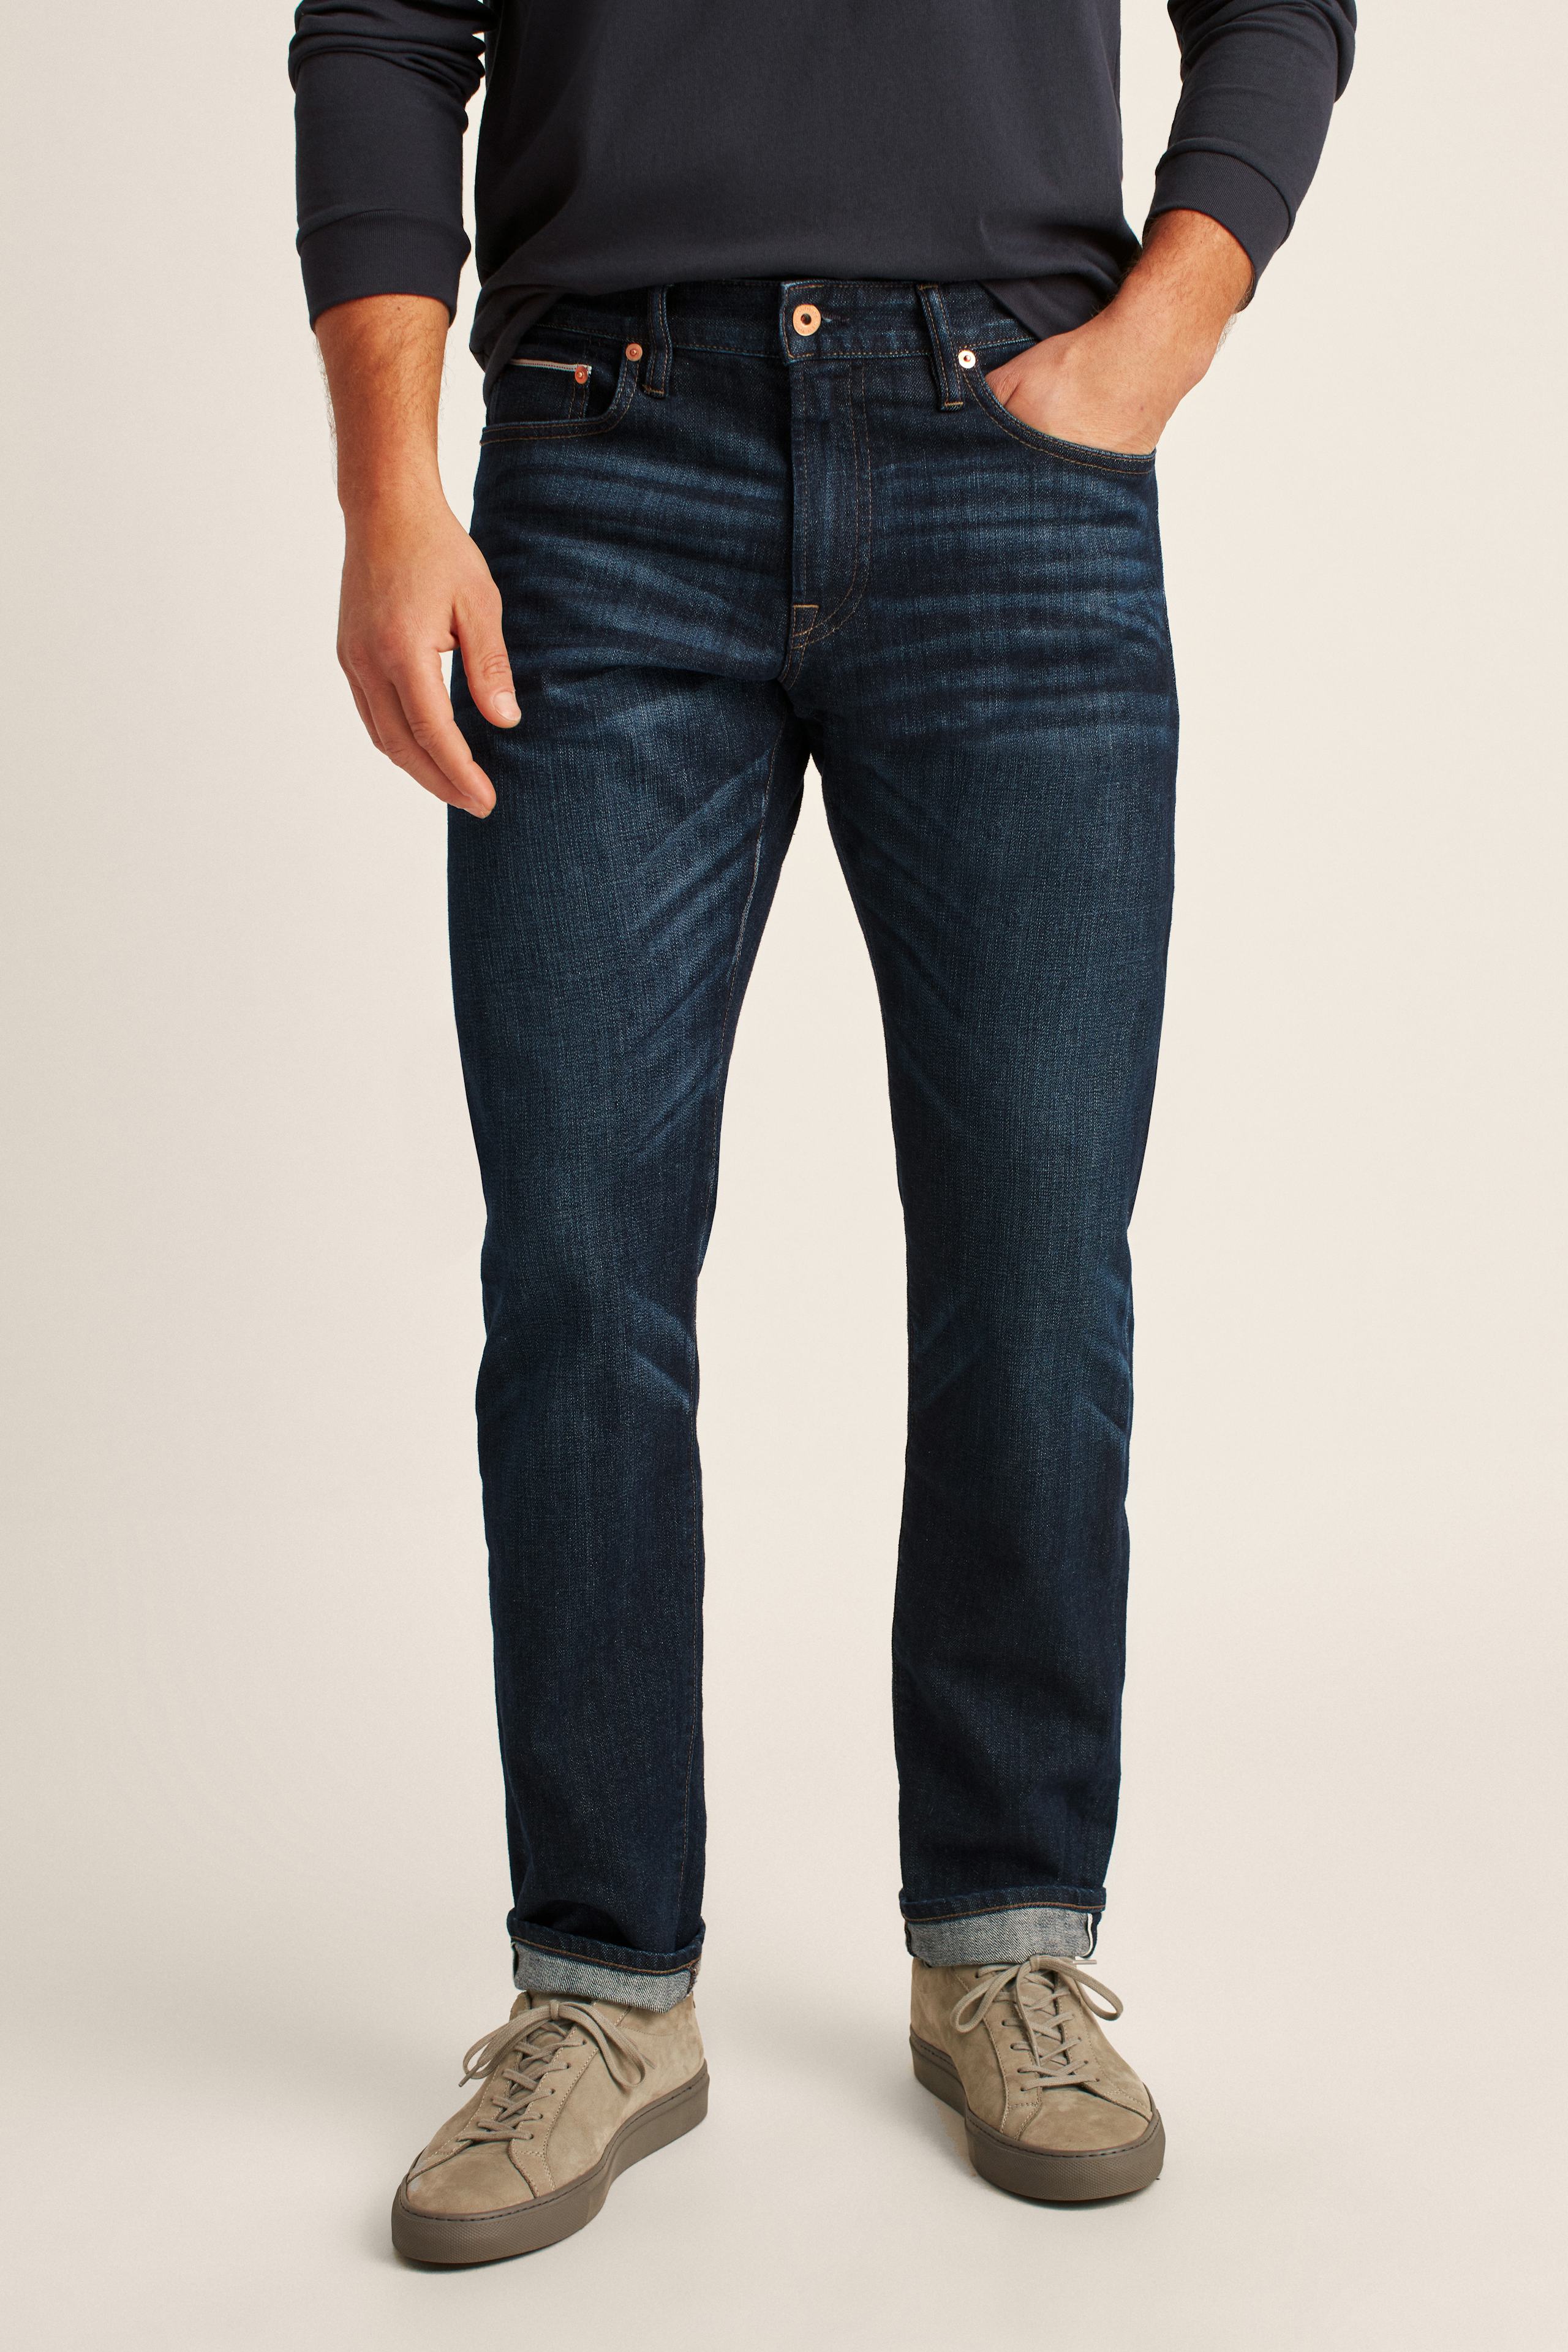 Selvage Stretch Jeans